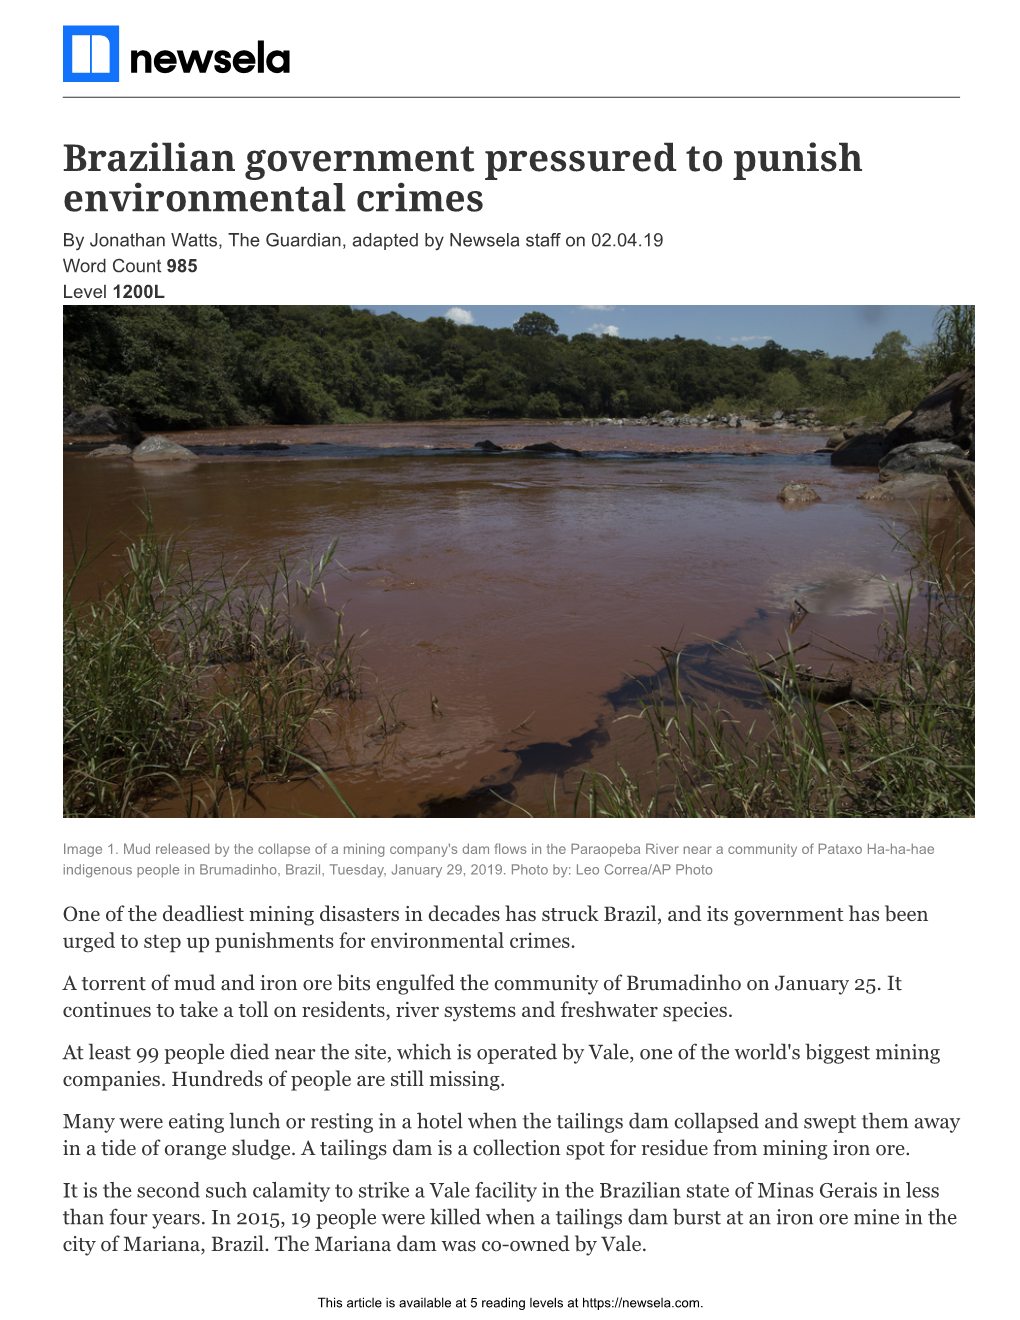 Brazilian Government Pressured to Punish Environmental Crimes by Jonathan Watts, the Guardian, Adapted by Newsela Staff on 02.04.19 Word Count 985 Level 1200L